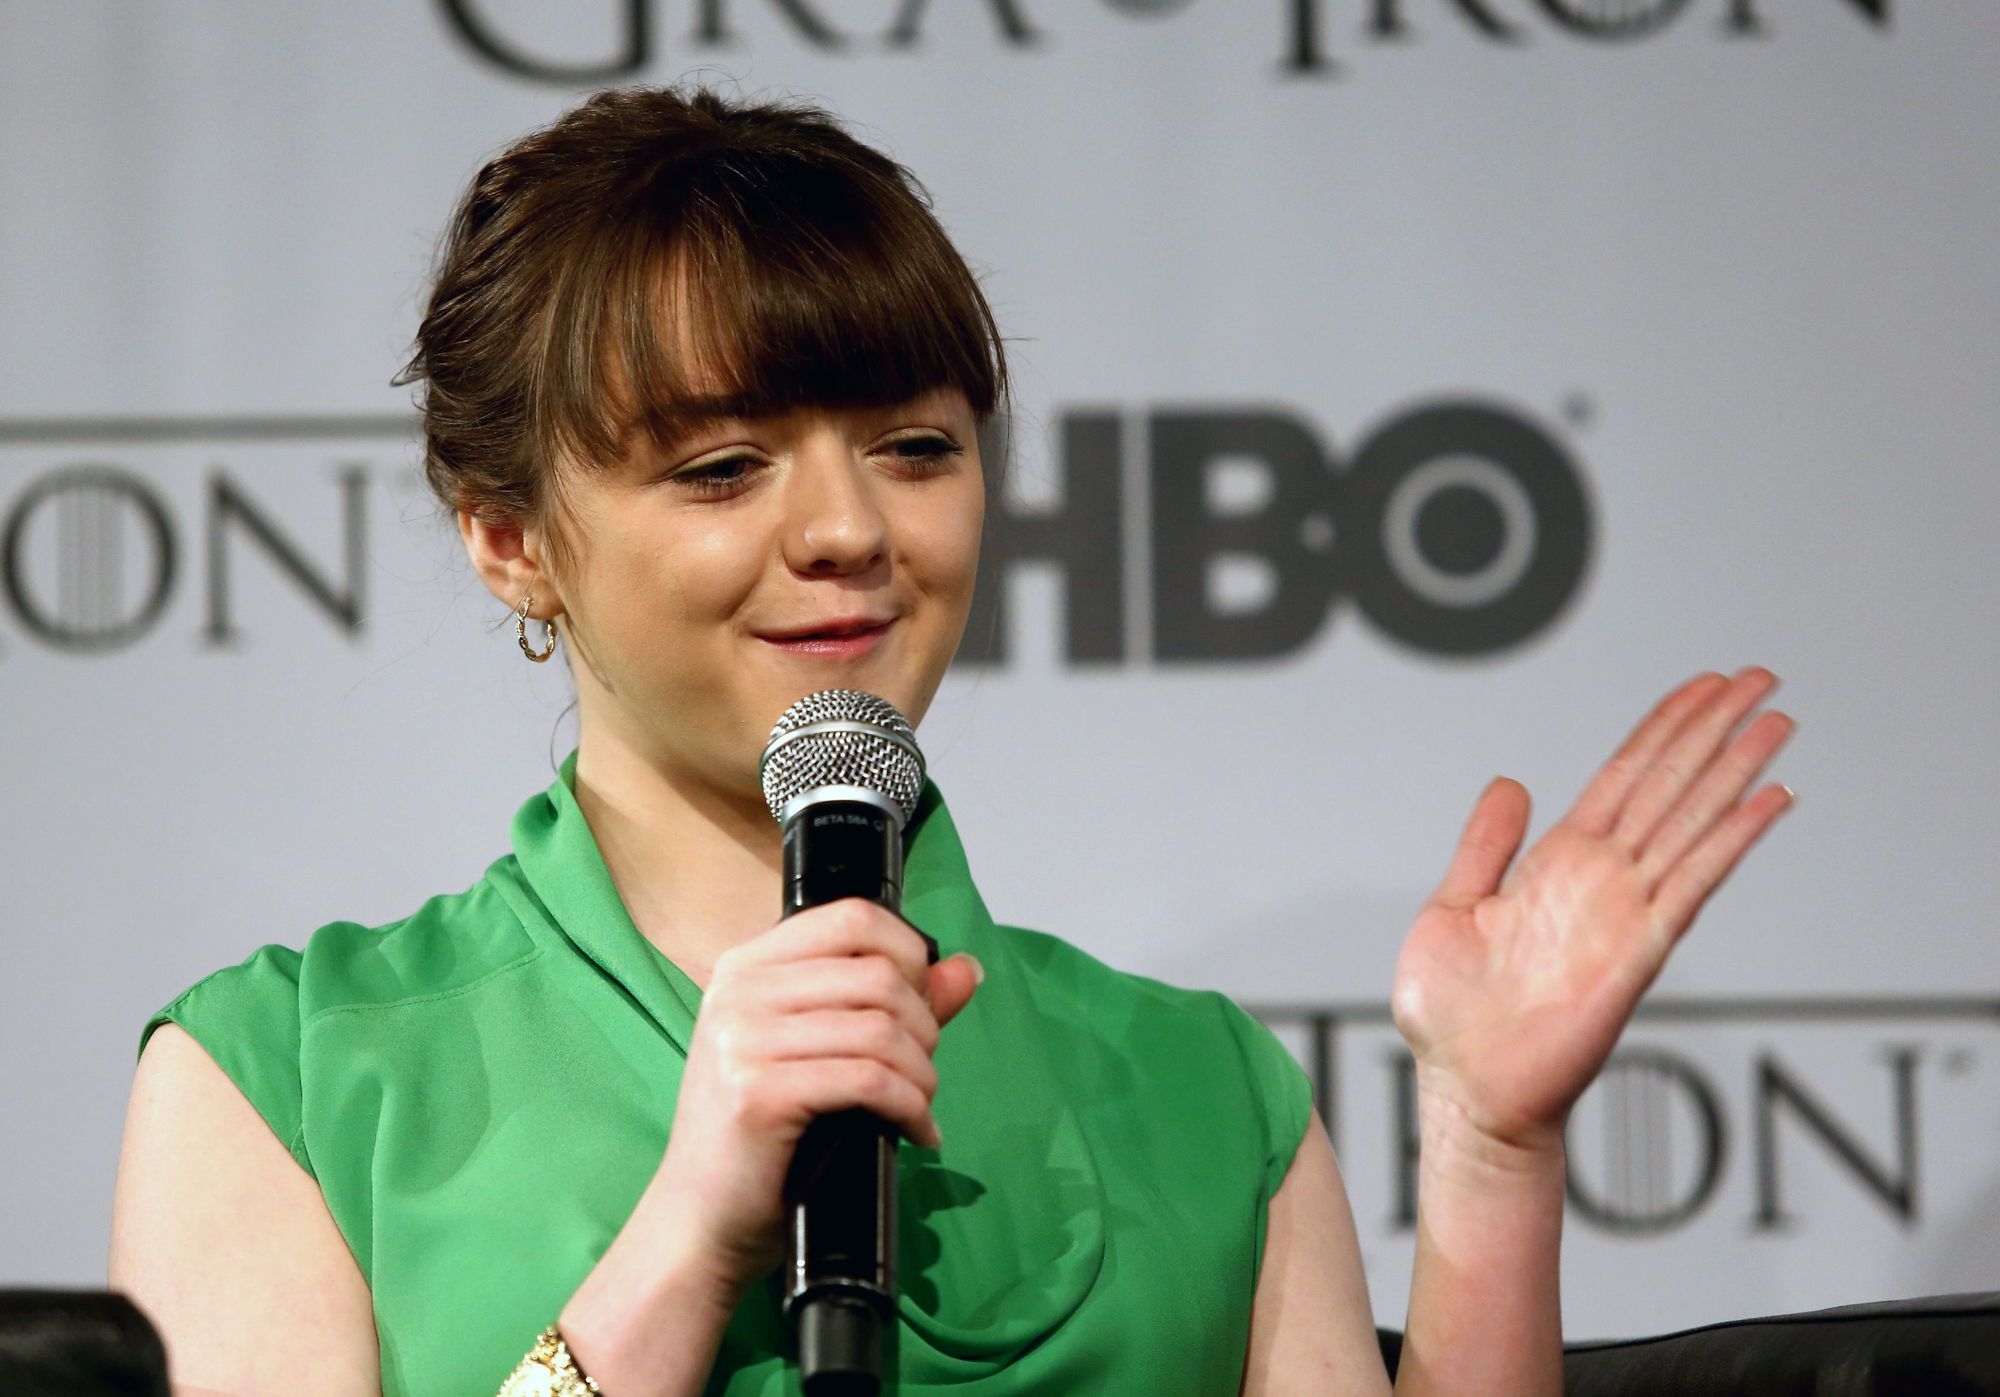 May15-Game_Of_Thrones_Press_Conference_in_Poland-0011.jpg